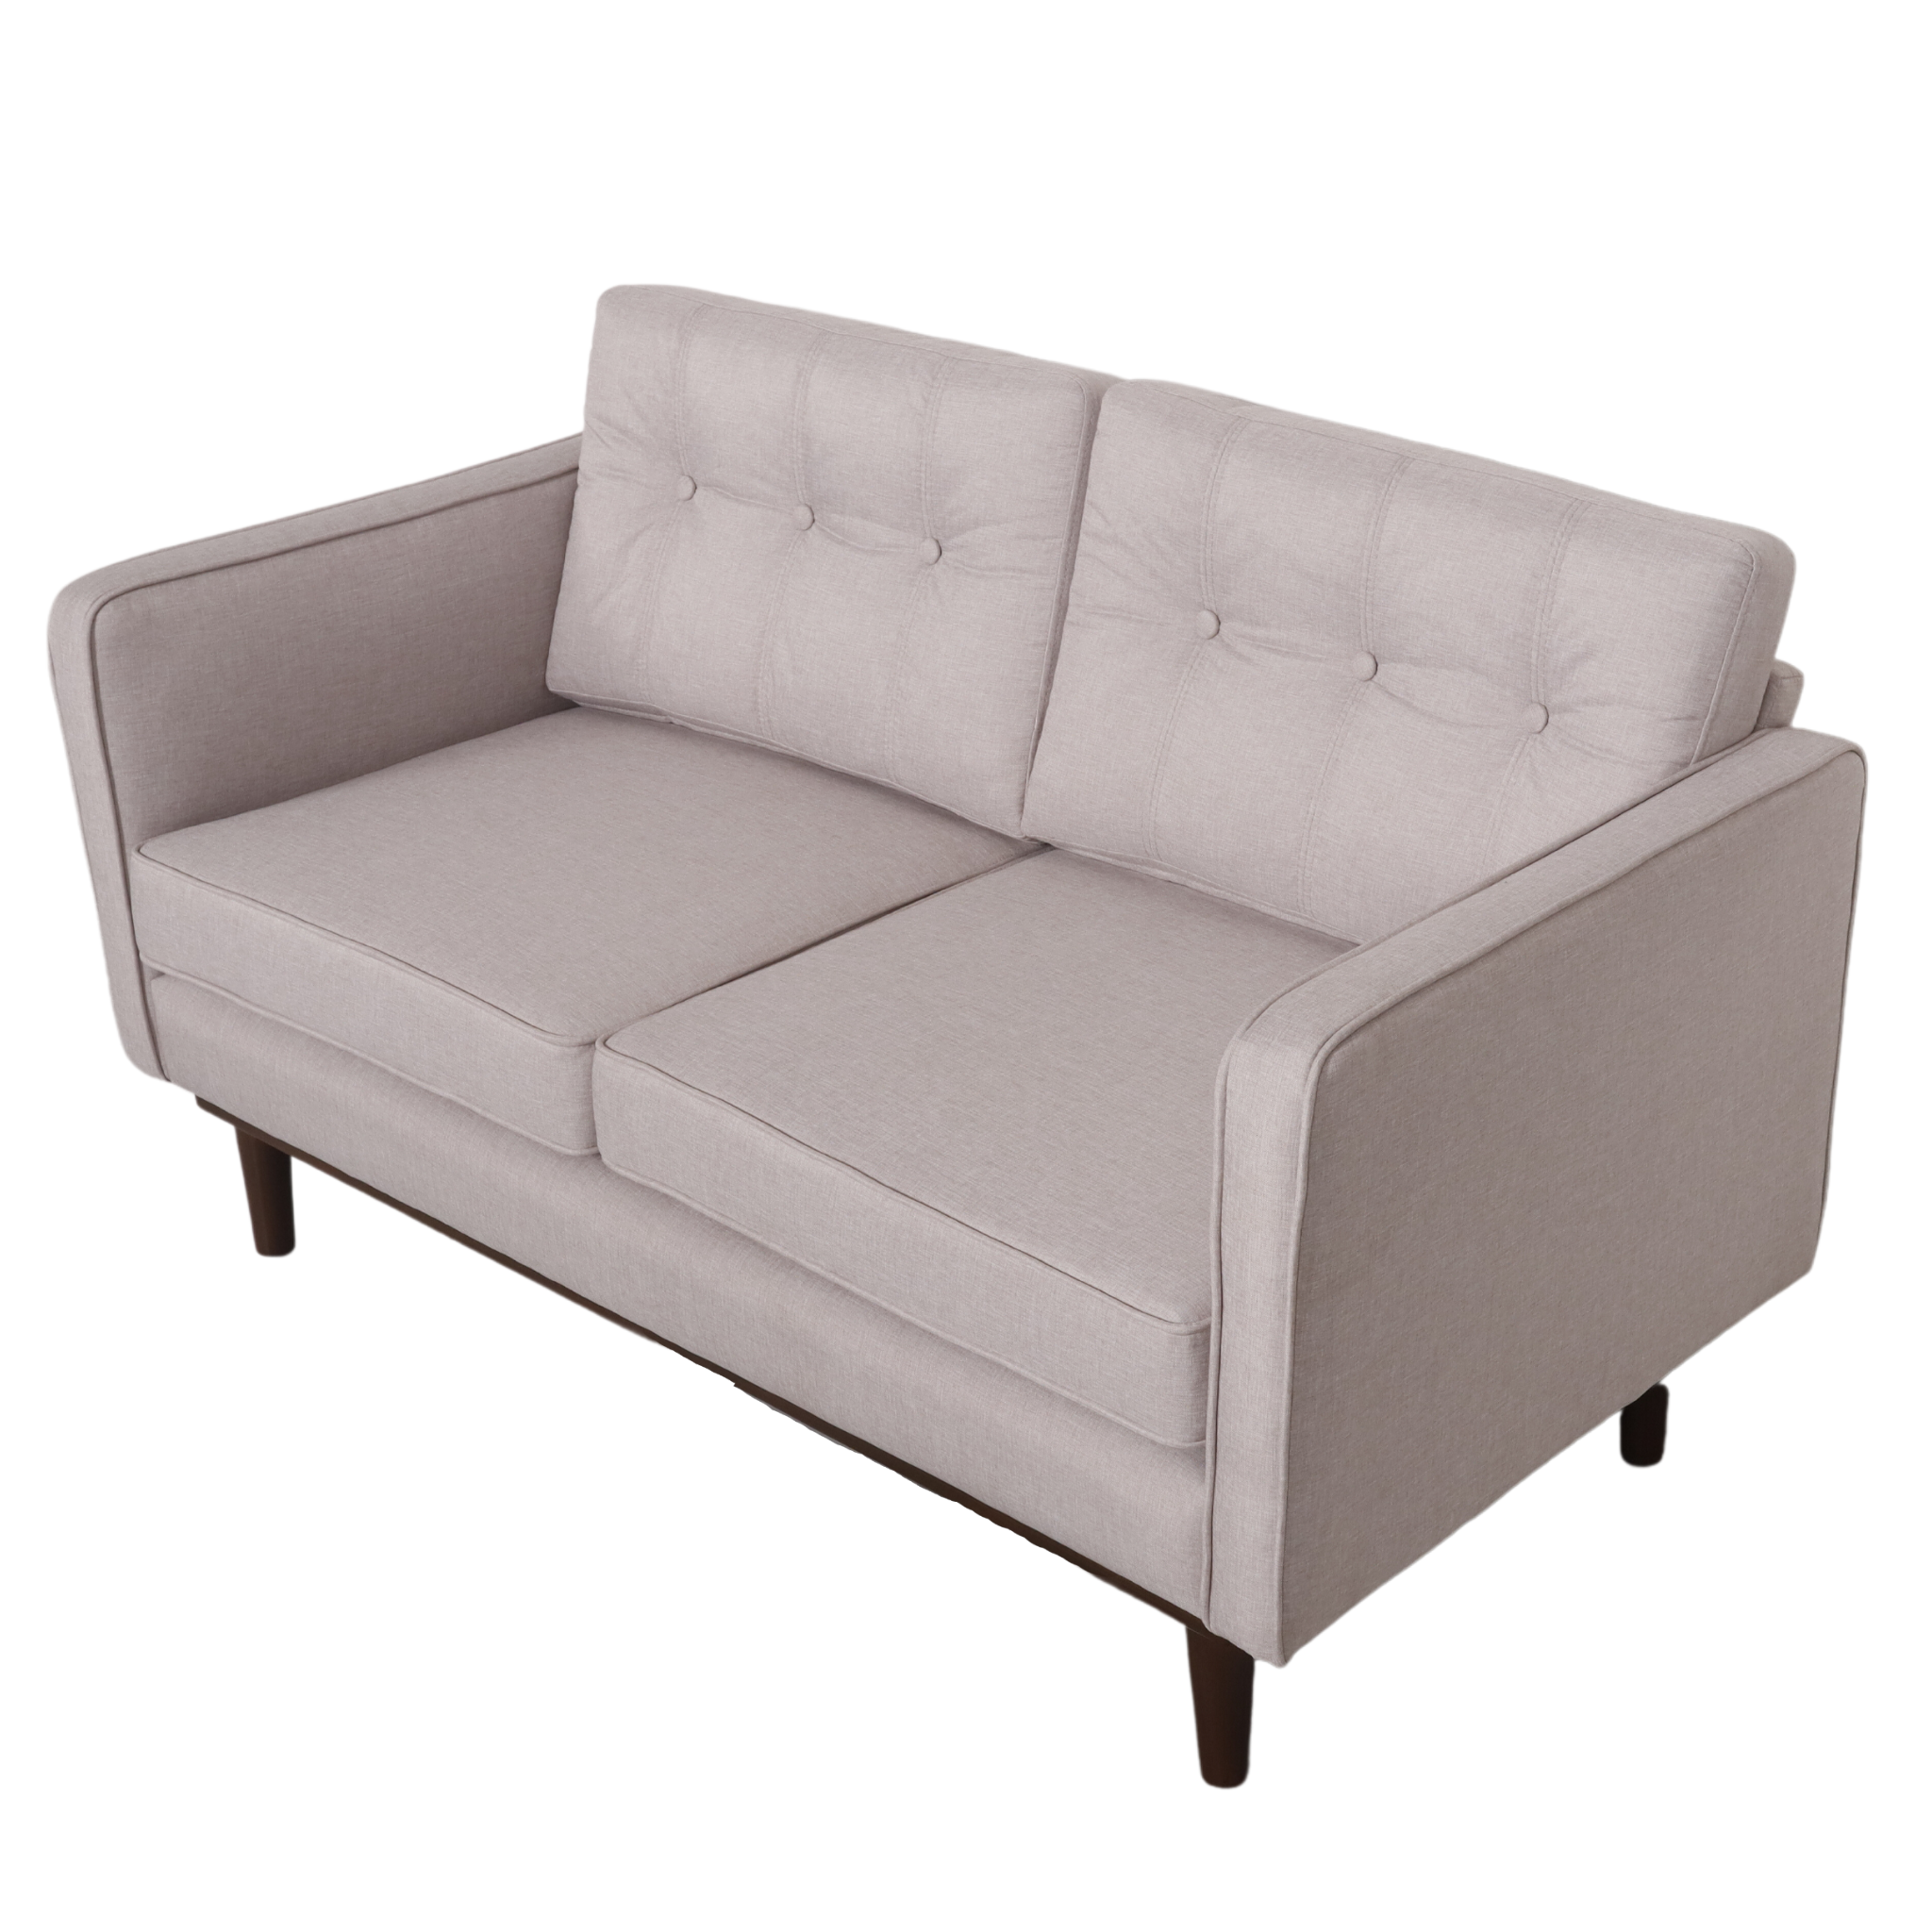 Jerry 2-Seater Fabric Sofa AF Home